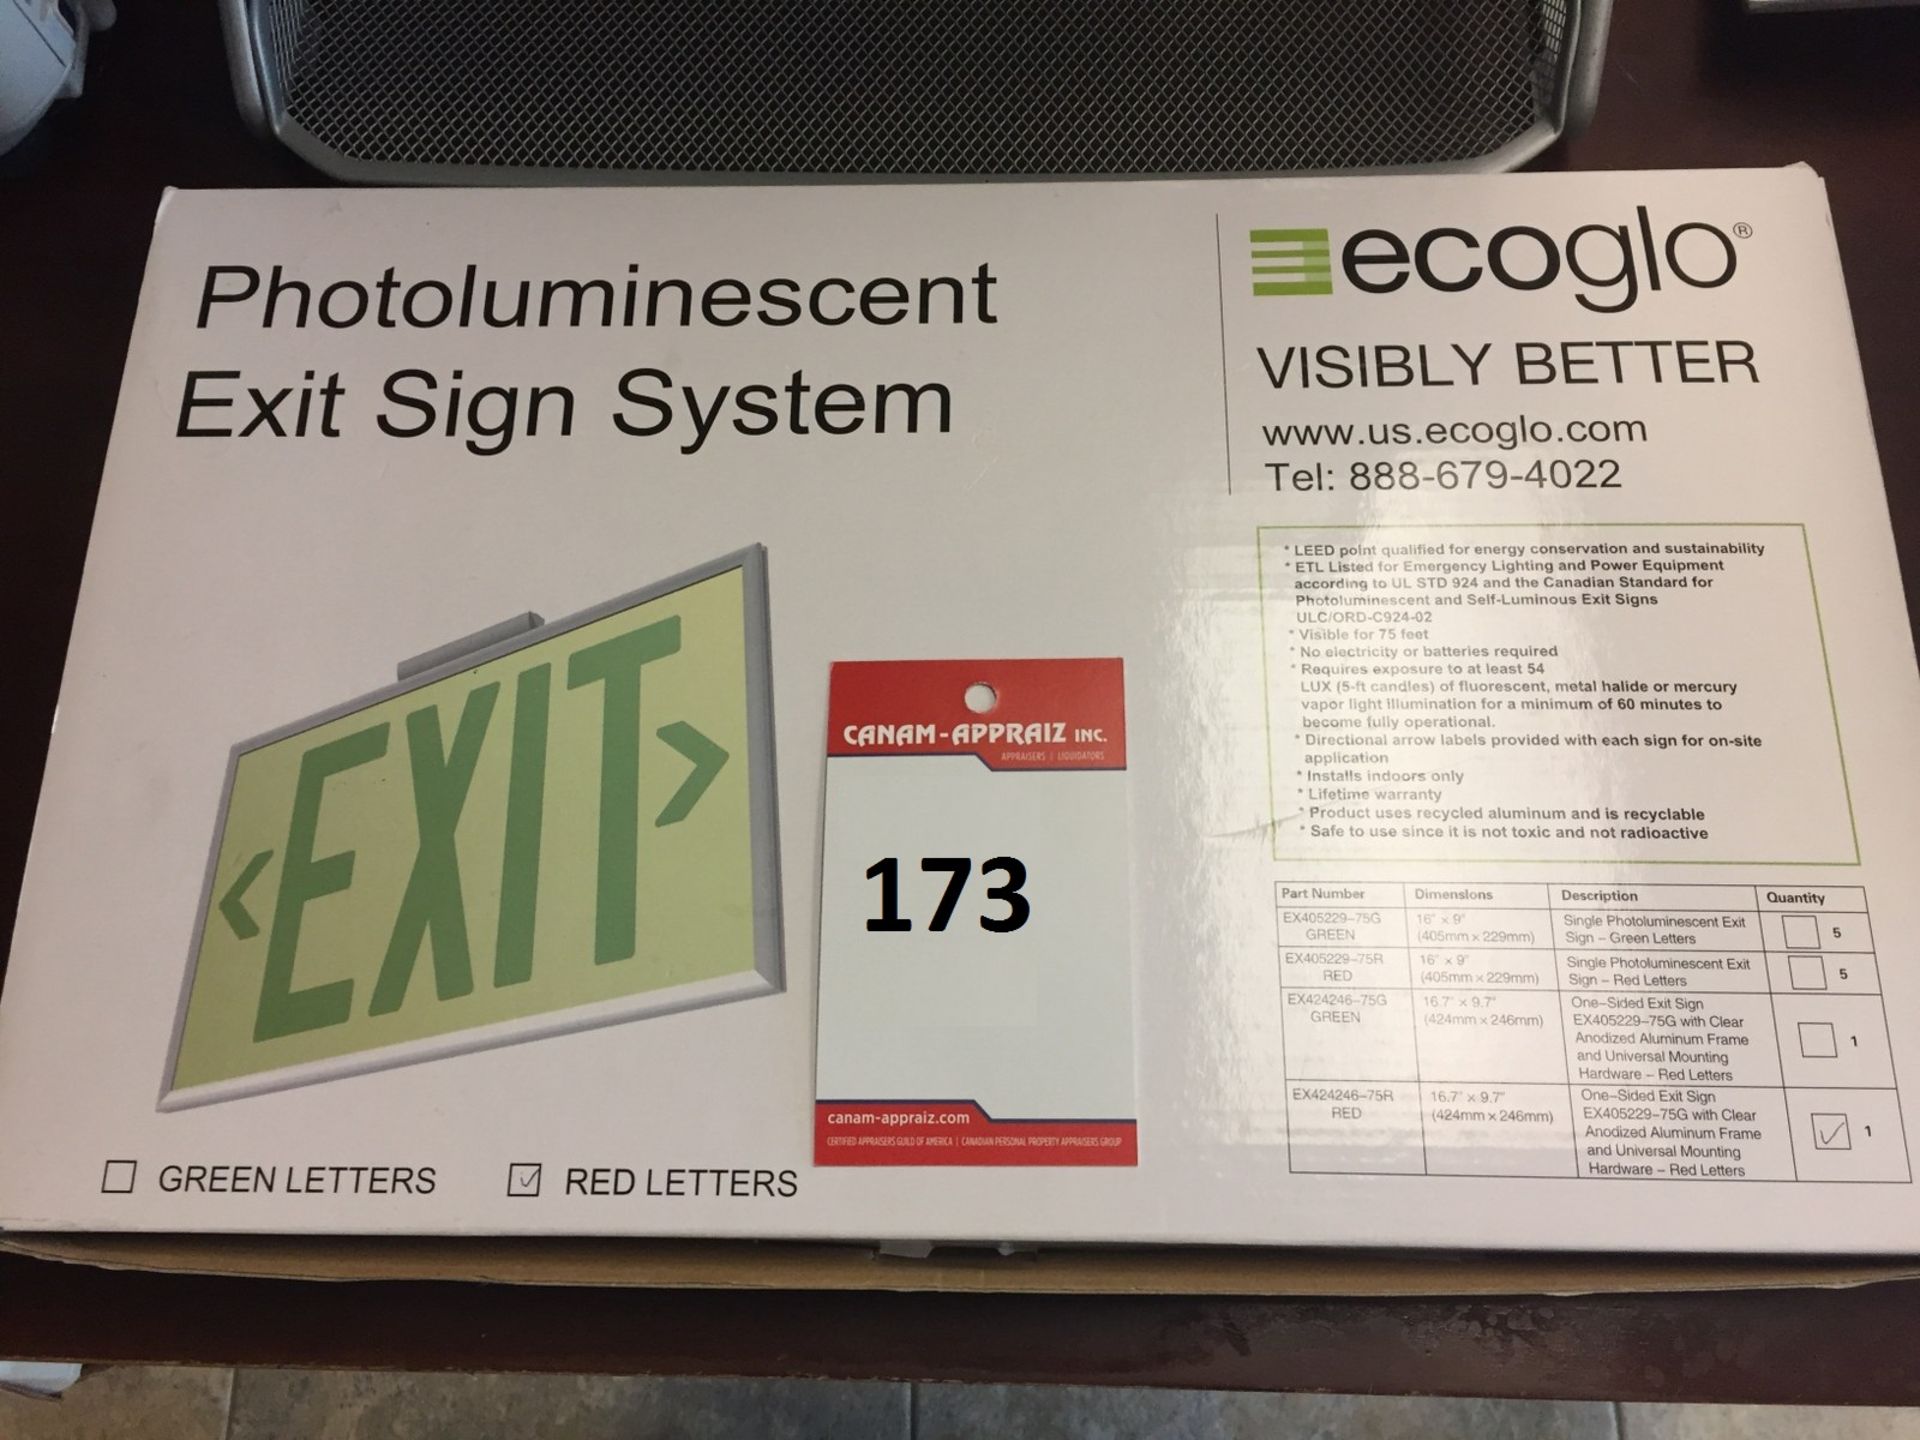 1 X ECOGLO - PHOTO-LUMINESCENT EXIT SIGN SYSTEM